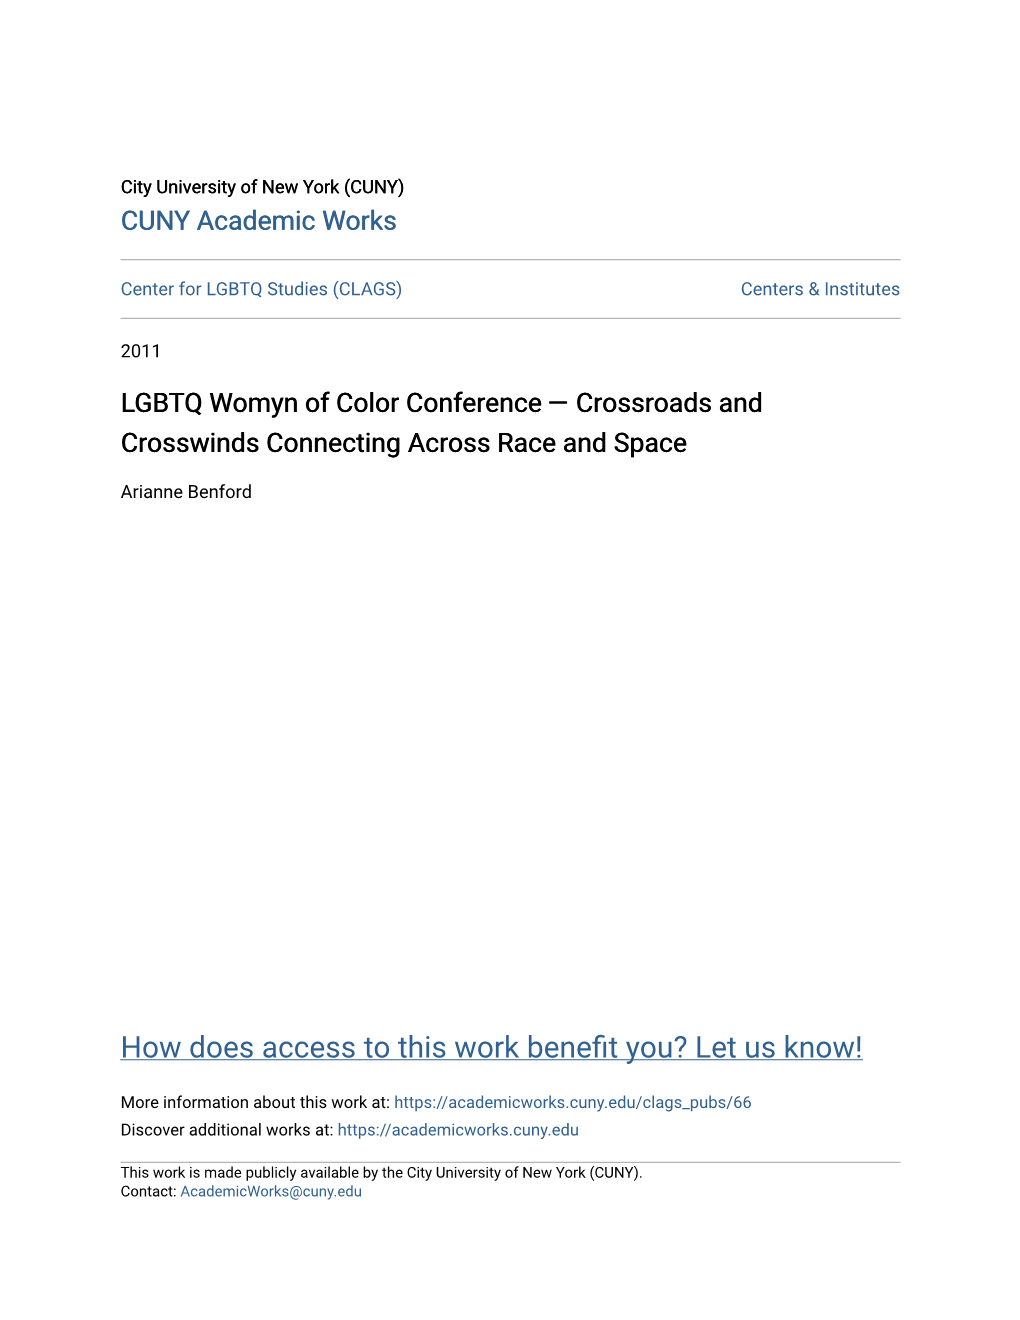 LGBTQ Womyn of Color Conference — Crossroads and Crosswinds Connecting Across Race and Space